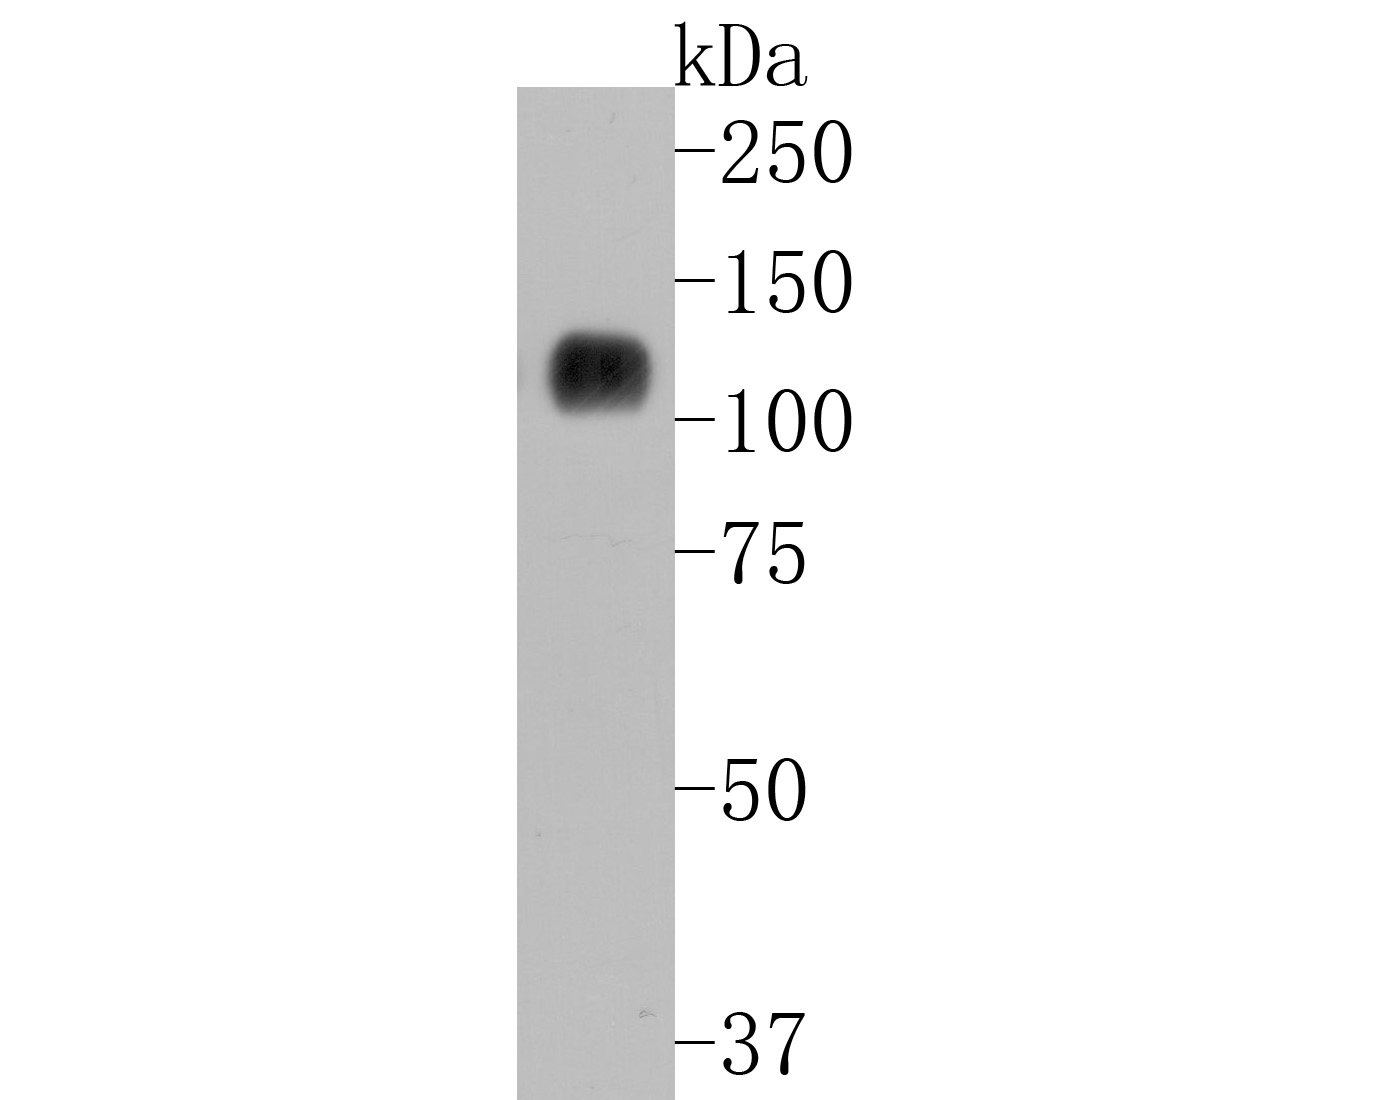 Western blot analysis of His-tag on N-terminal His-tagged recombinant protein lysates. Proteins were transferred to a PVDF membrane and blocked with 5% BSA in PBS for 1 hour at room temperature. The primary antibody (HA600028, 1/10,000) was used in 5% BSA at room temperature for 2 hours. Goat Anti-Mouse IgG - HRP Secondary Antibody (HA1006) at 1:20,000 dilution was used for 1 hour at room temperature.